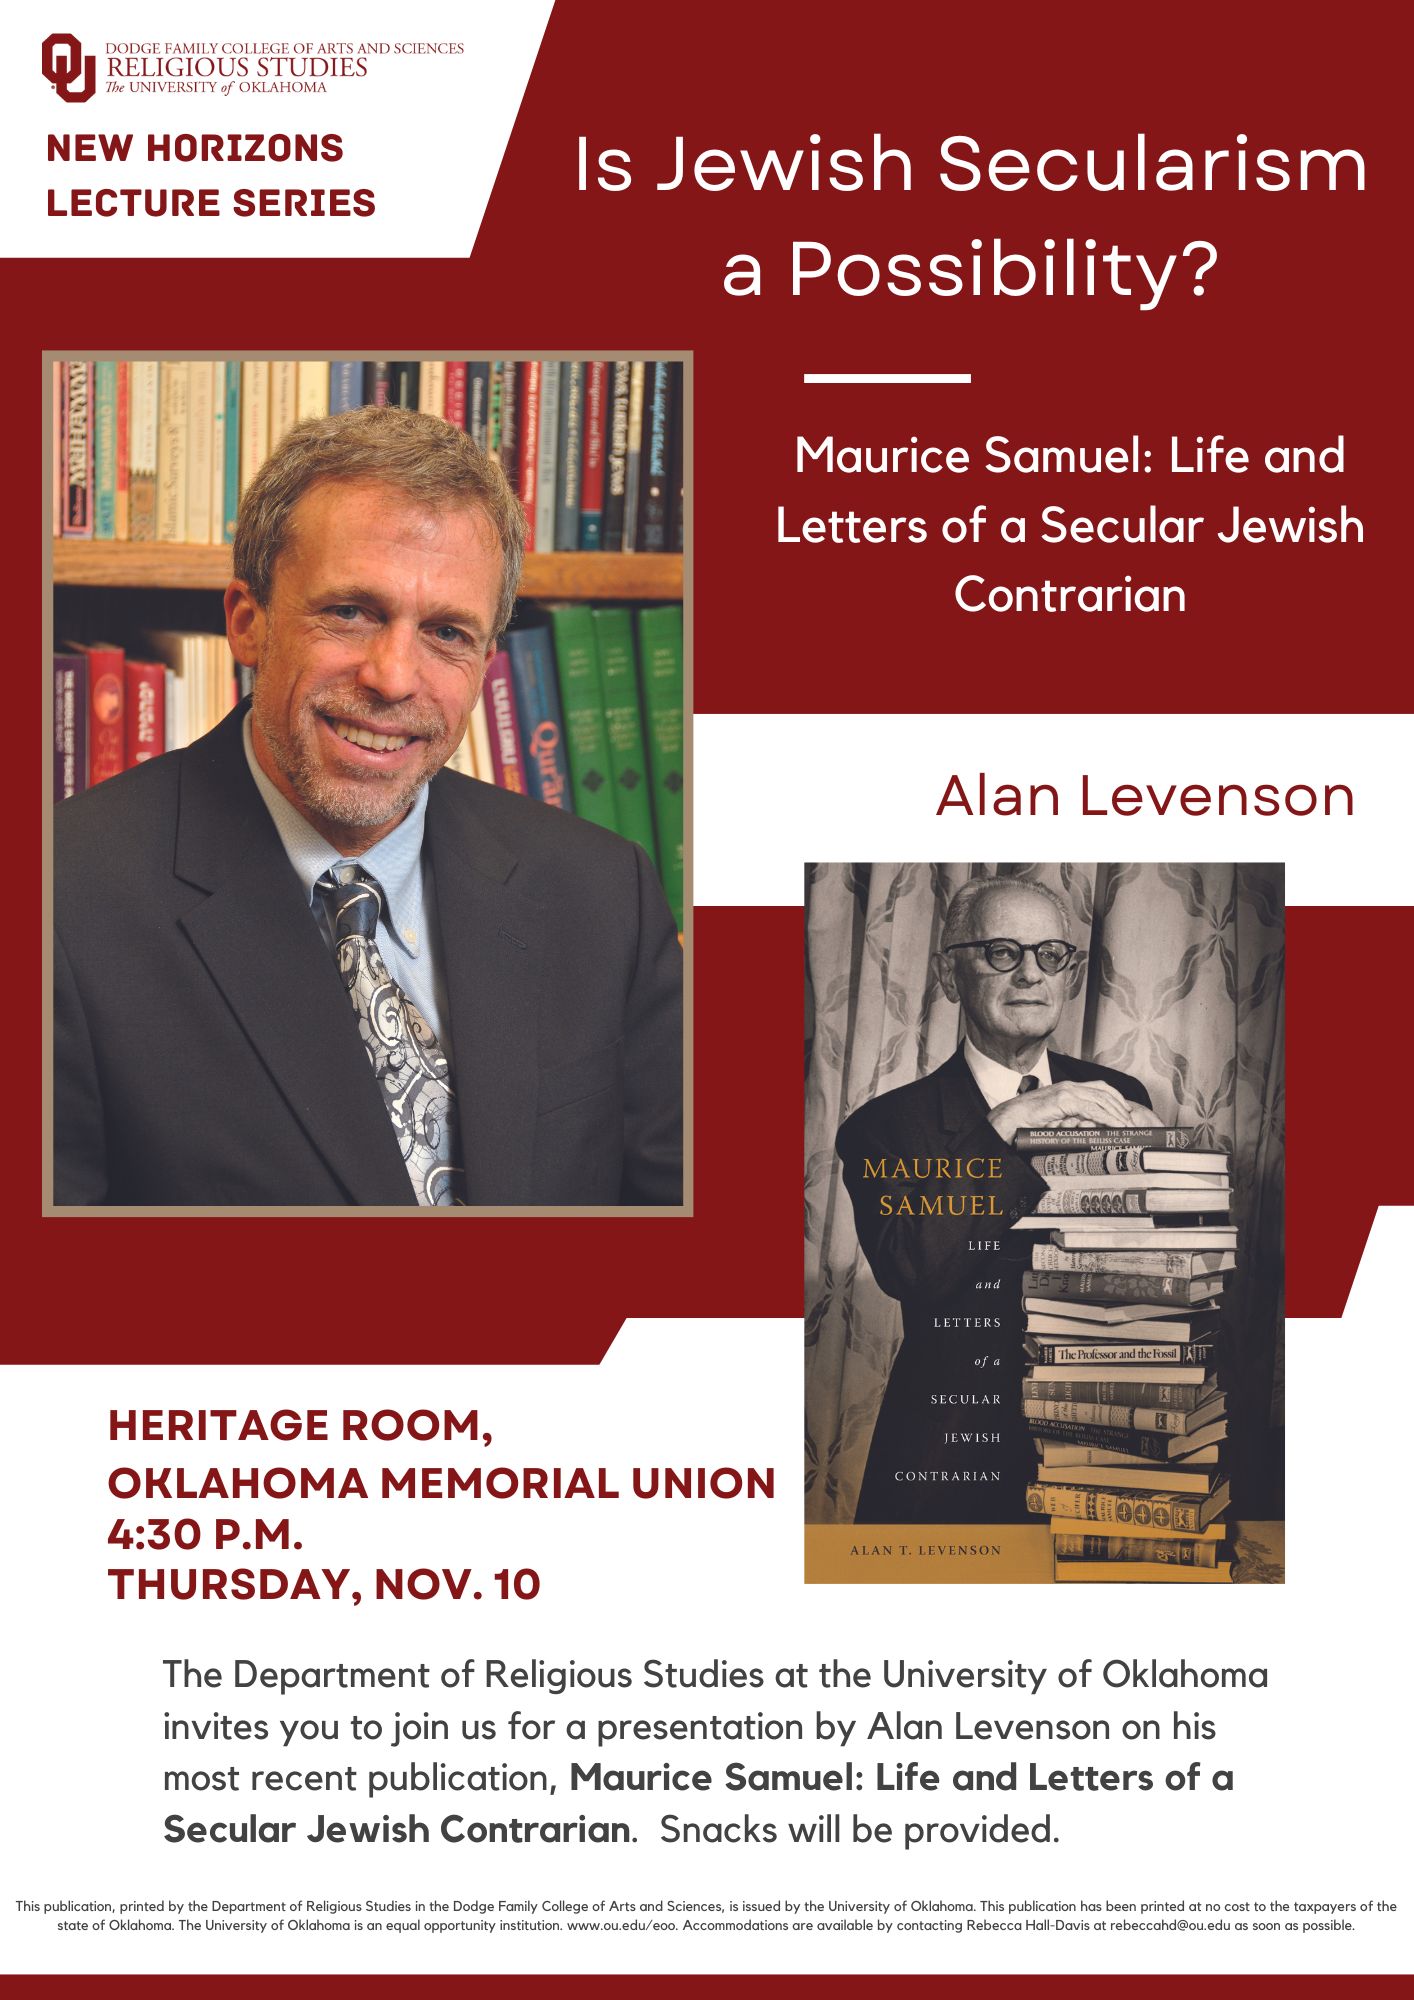 The Department of Religious Studies invites you to a New Horizons lecture titled *Is Jewish Secularism a Possibility? Maurice Samuel: Life and Letters of a Secular Jewish Contrarian* by Alan Levenson on his most recent publication. Please join us!  Heritage Room, Oklahoma Memorial Union 4:30 - 5;30 p.m. Thursday, Nov. 10 Snacks will be provided.